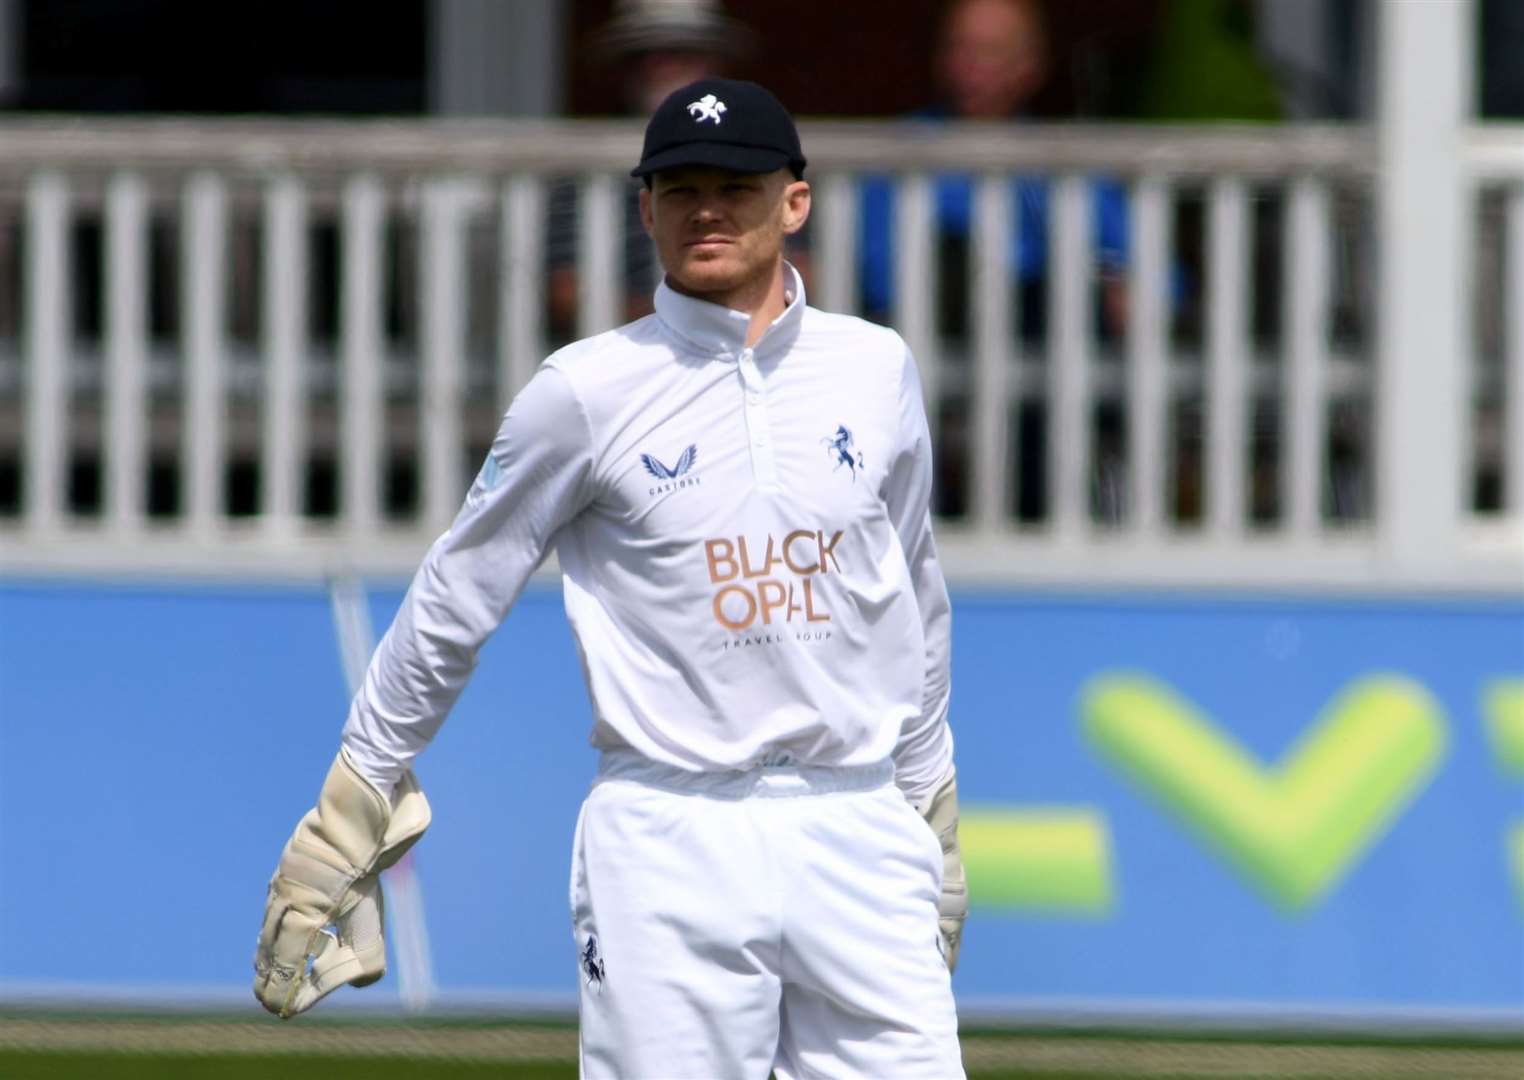 Kent captain Sam Billings – took the solitary catch on day one after losing the toss against Essex. Picture: Barry Goodwin